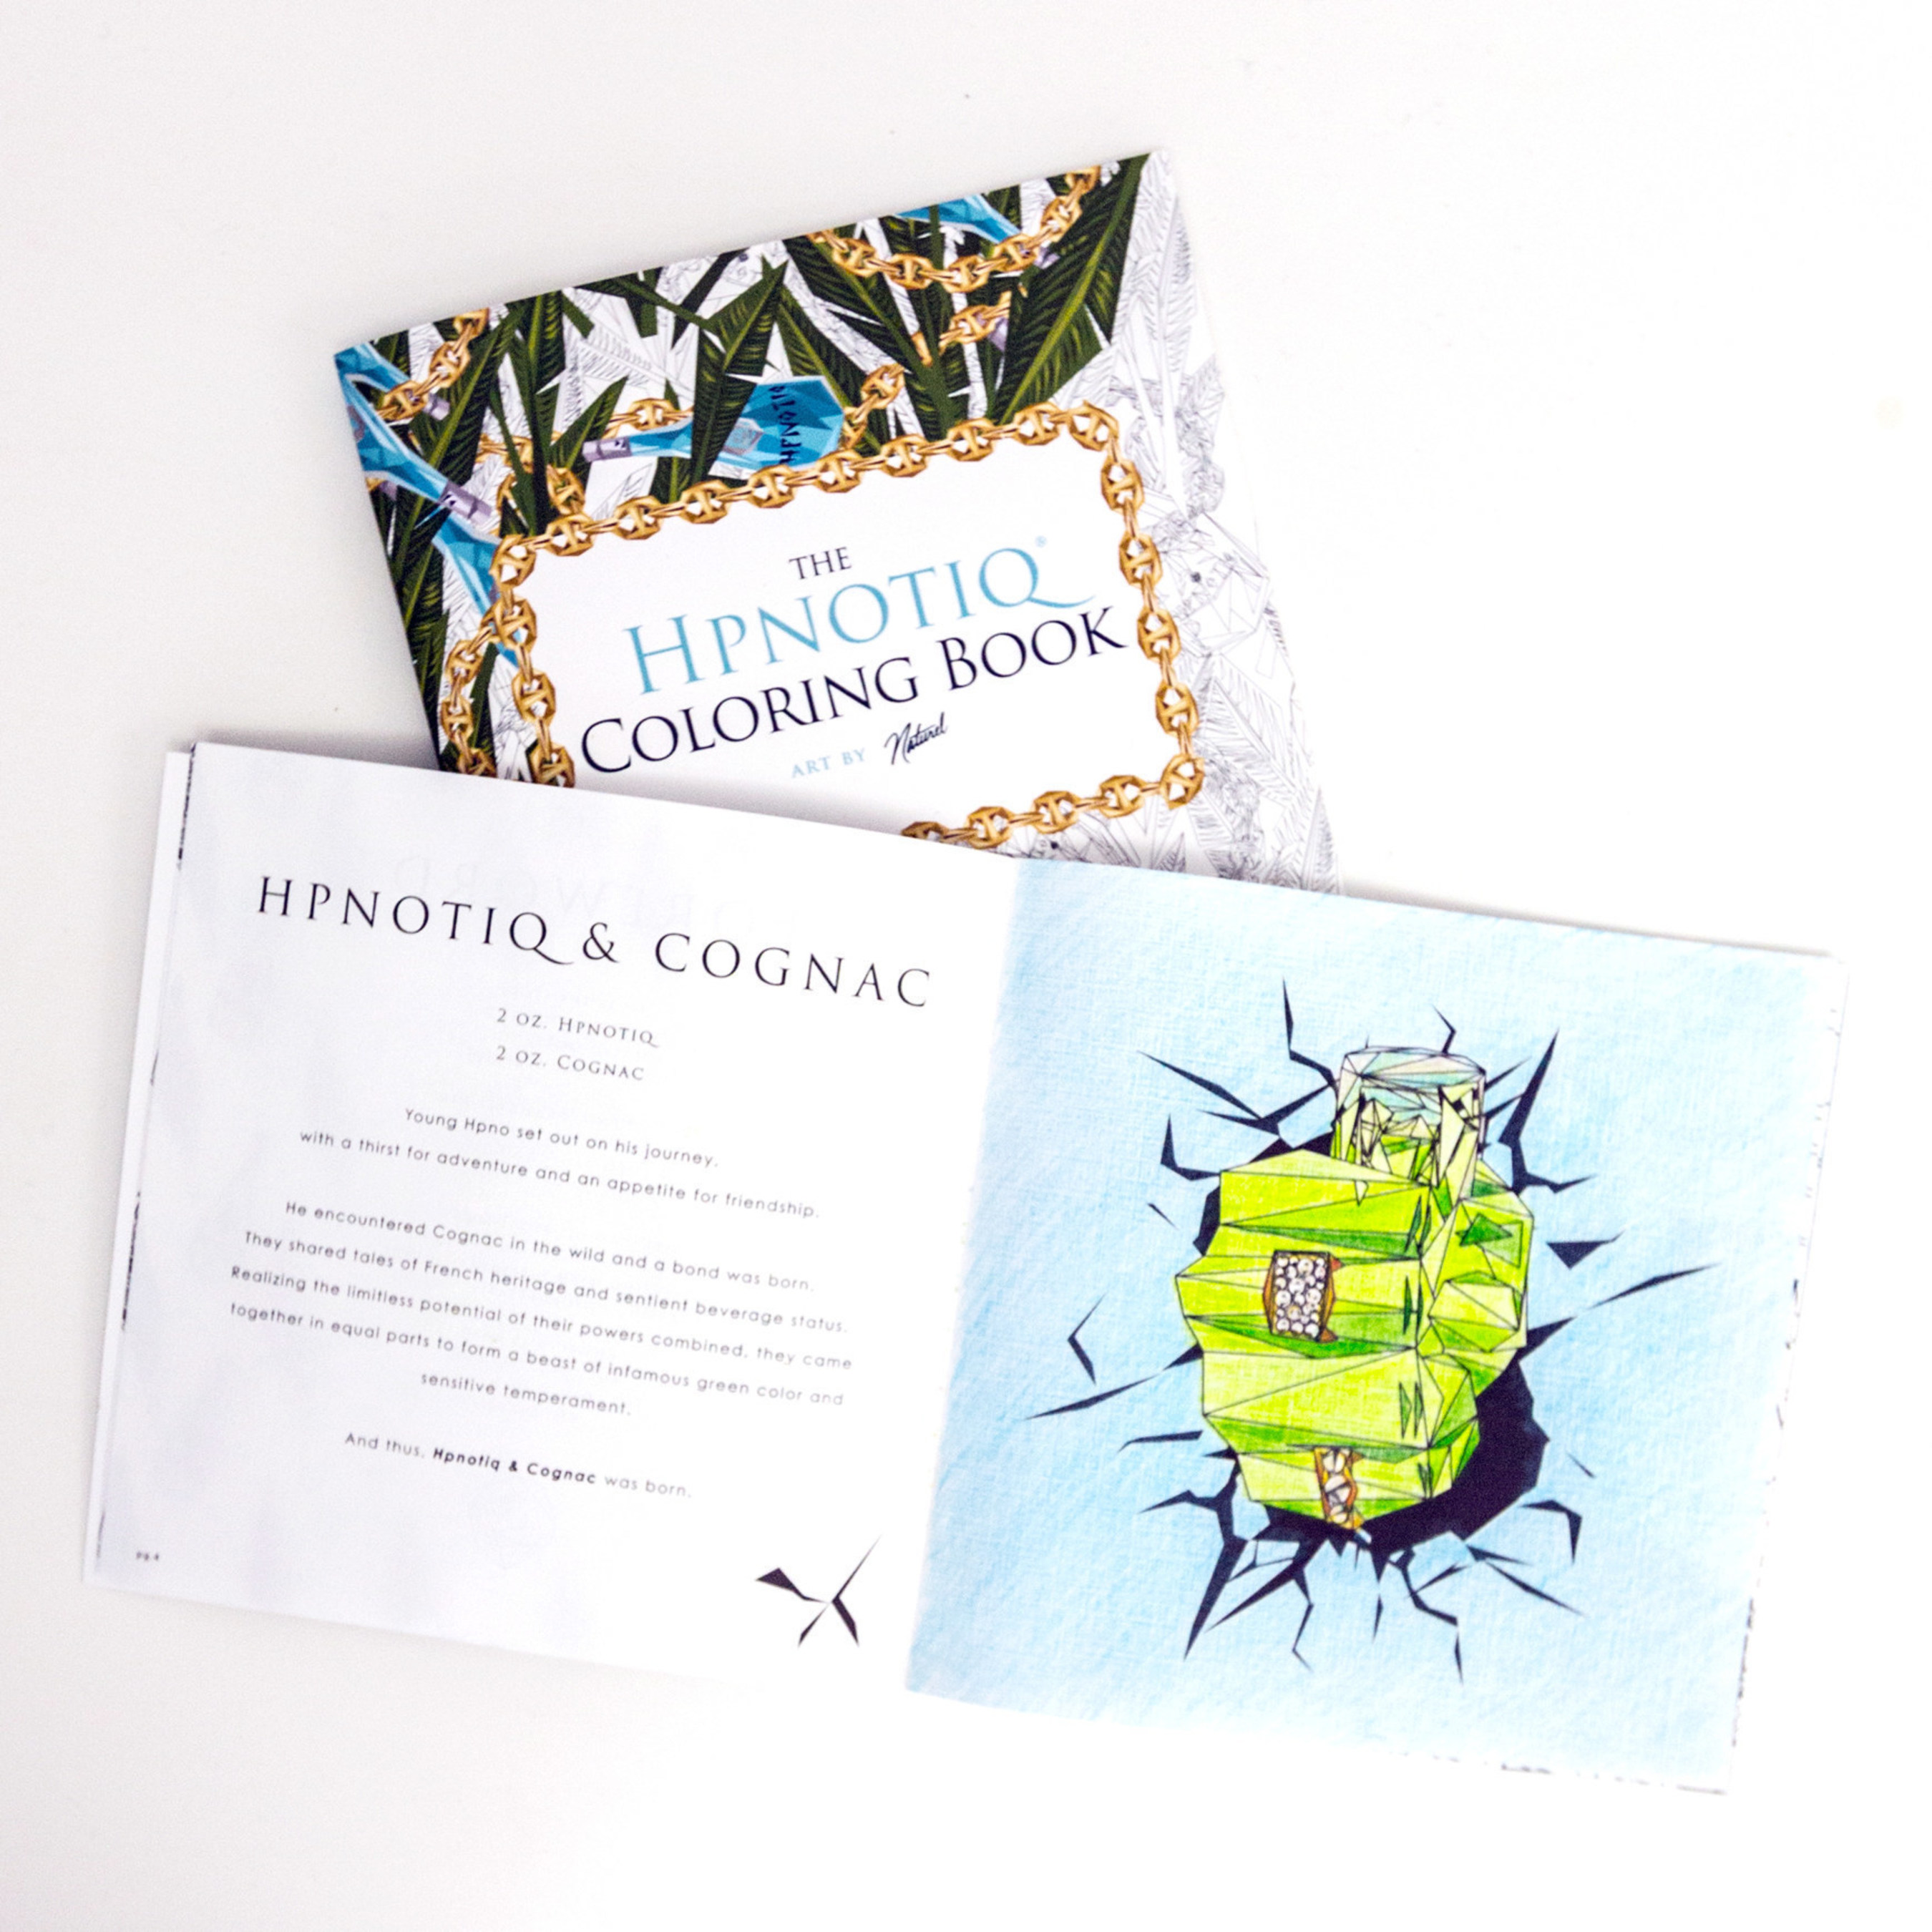 As part of the brand's winter campaign, Hpnotiq partnered with artist Naturel to create a custom adult coloring book, which doubles as a cocktail recipe guide, for influencers, press and fans on social media.